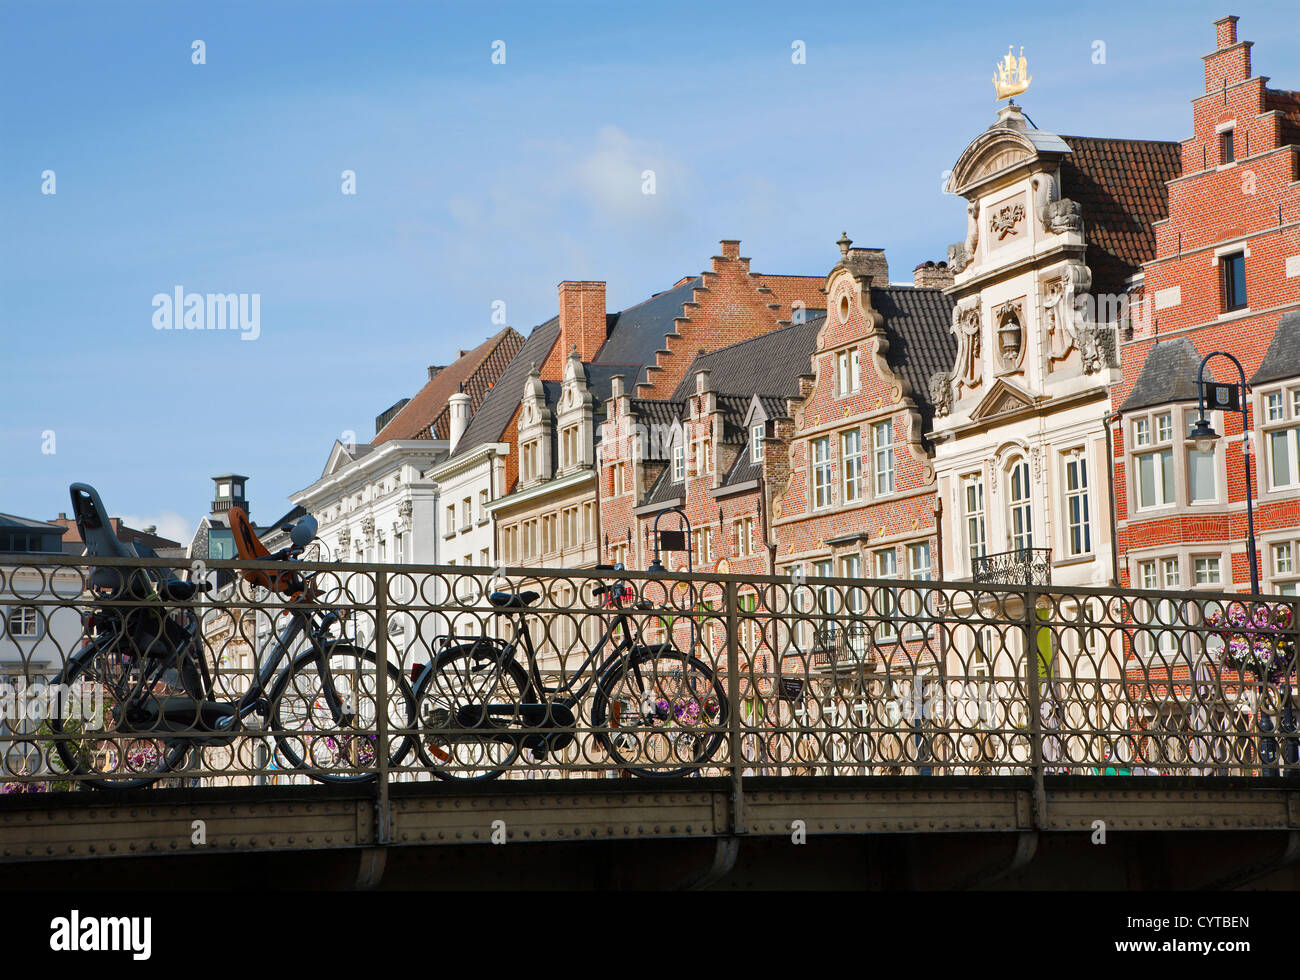 Ghent - bicycle on the bridge and typical brick houses in morning light Stock Photo